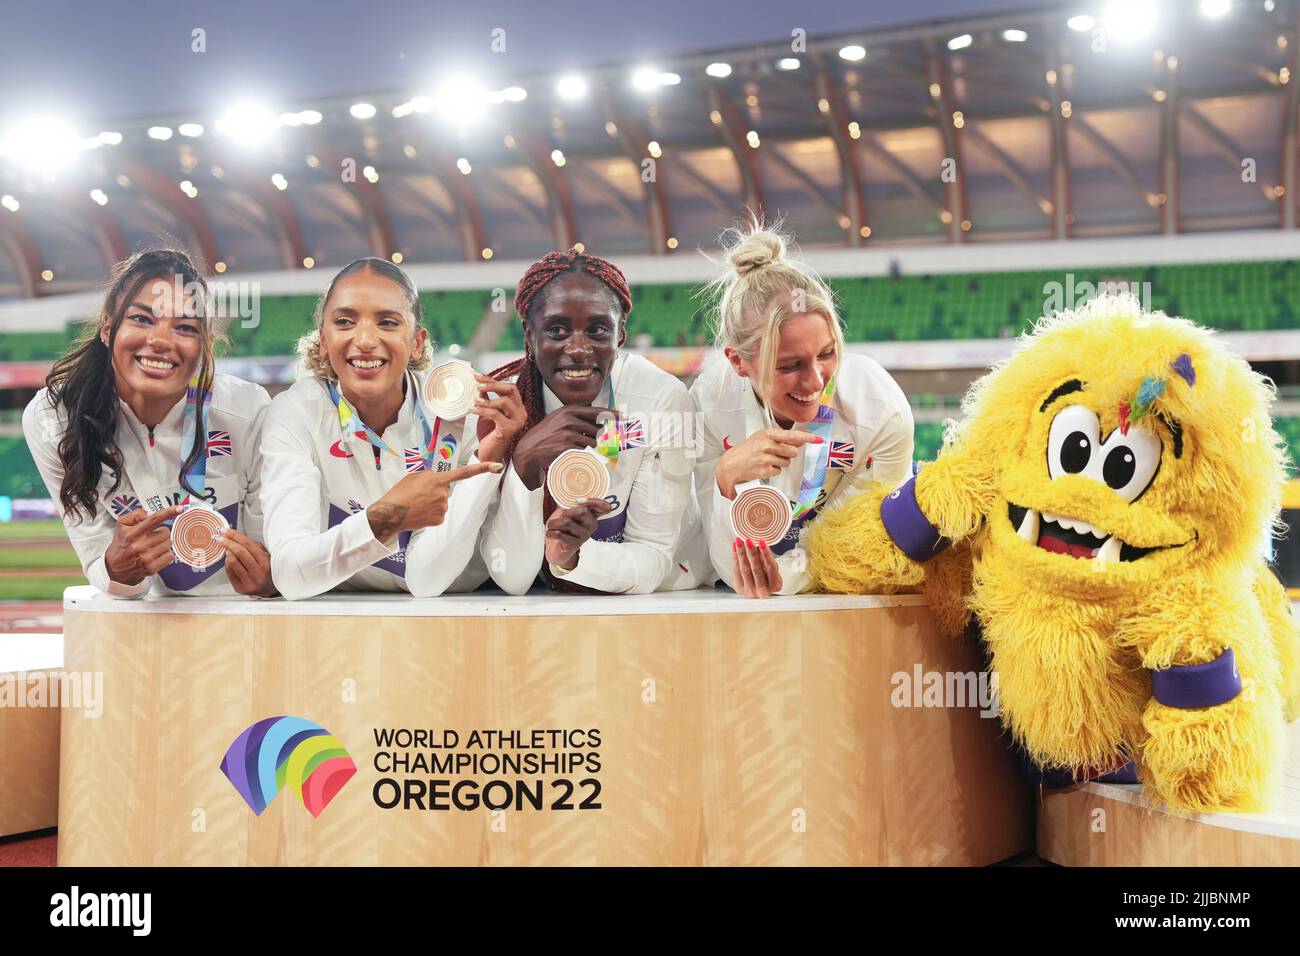 Eugene, USA. 24th July, 2022. Bronze medalists Nicole Yeargin, Laviai Nielsen, Victoria Ohuruogu and Jessie Knight (L-R) of Team of Britain celebrate during the women's 4x400m relay awarding ceremony at the World Athletics Championships Oregon22 in Eugene, Oregon, the United States, July 24, 2022. Credit: Wu Xiaoling/Xinhua/Alamy Live News Stock Photo